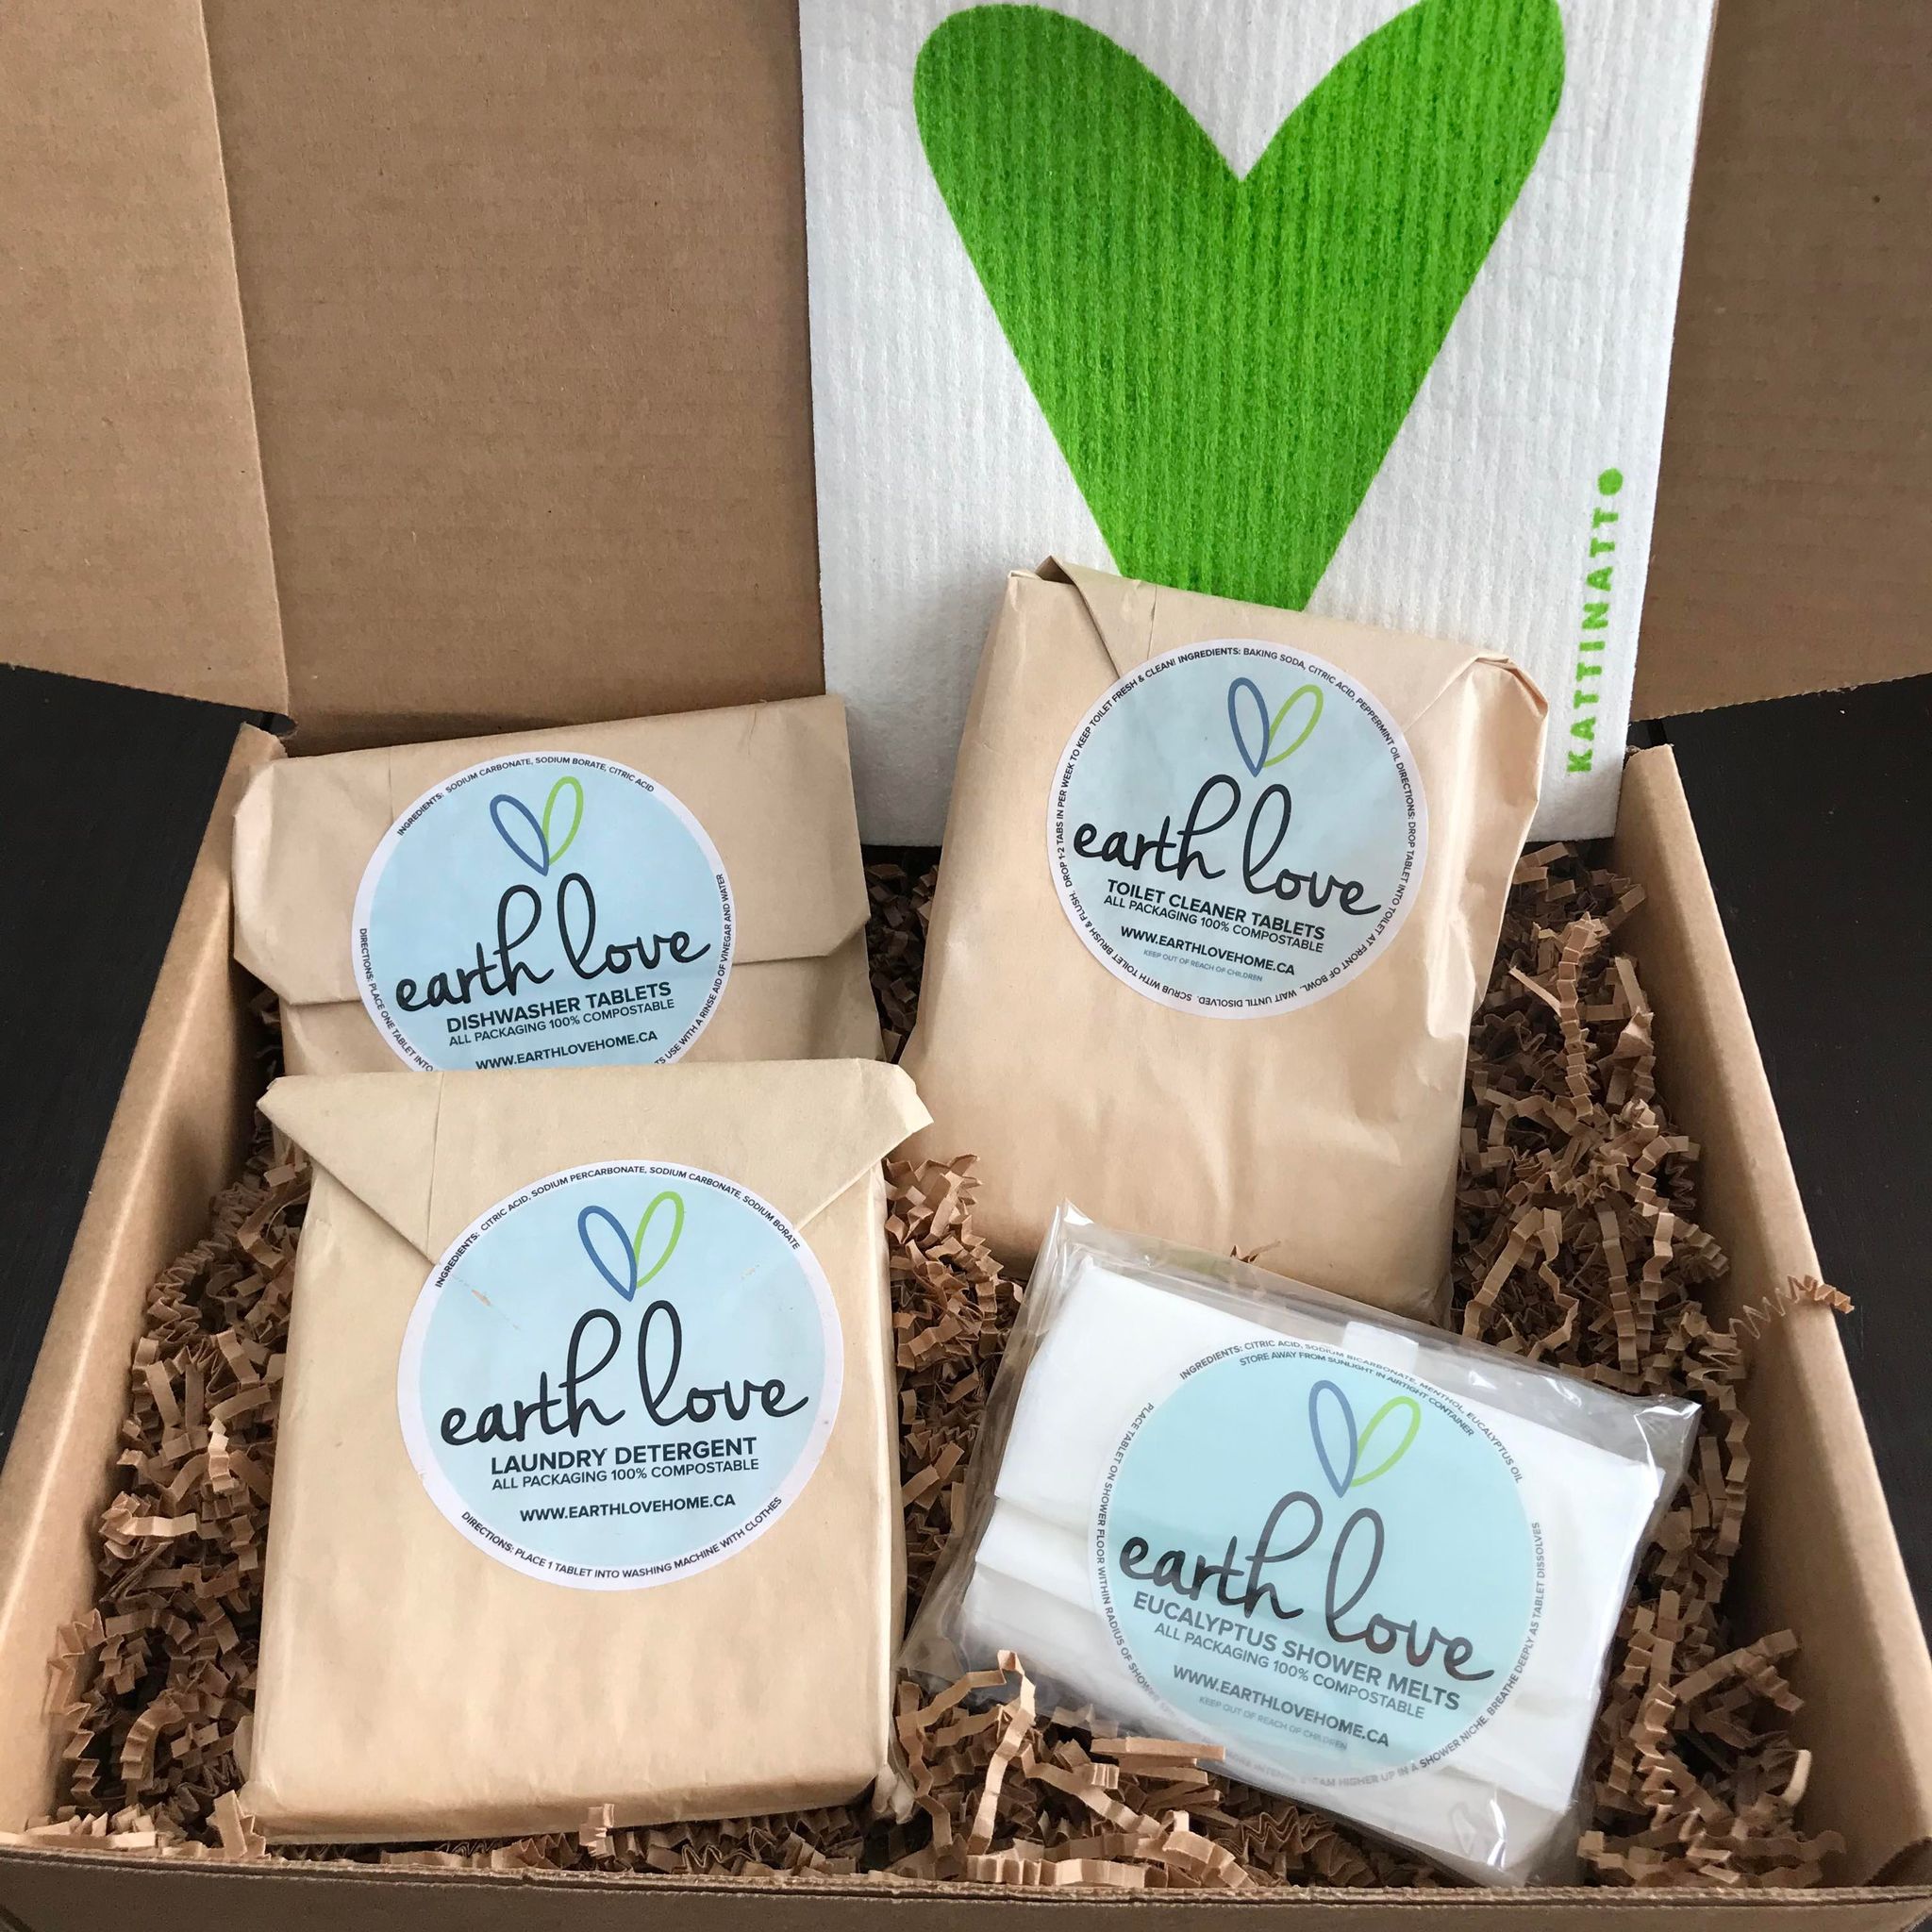 Majamas Earth - You deserve a break! Soak up some ME-time & GET 10% OFF  #ecochic intimates in our GIFT BOXES . Customize a set of #ecofriendly  ethical #USAMADE #MAJAMASearth MUST-HAVES for